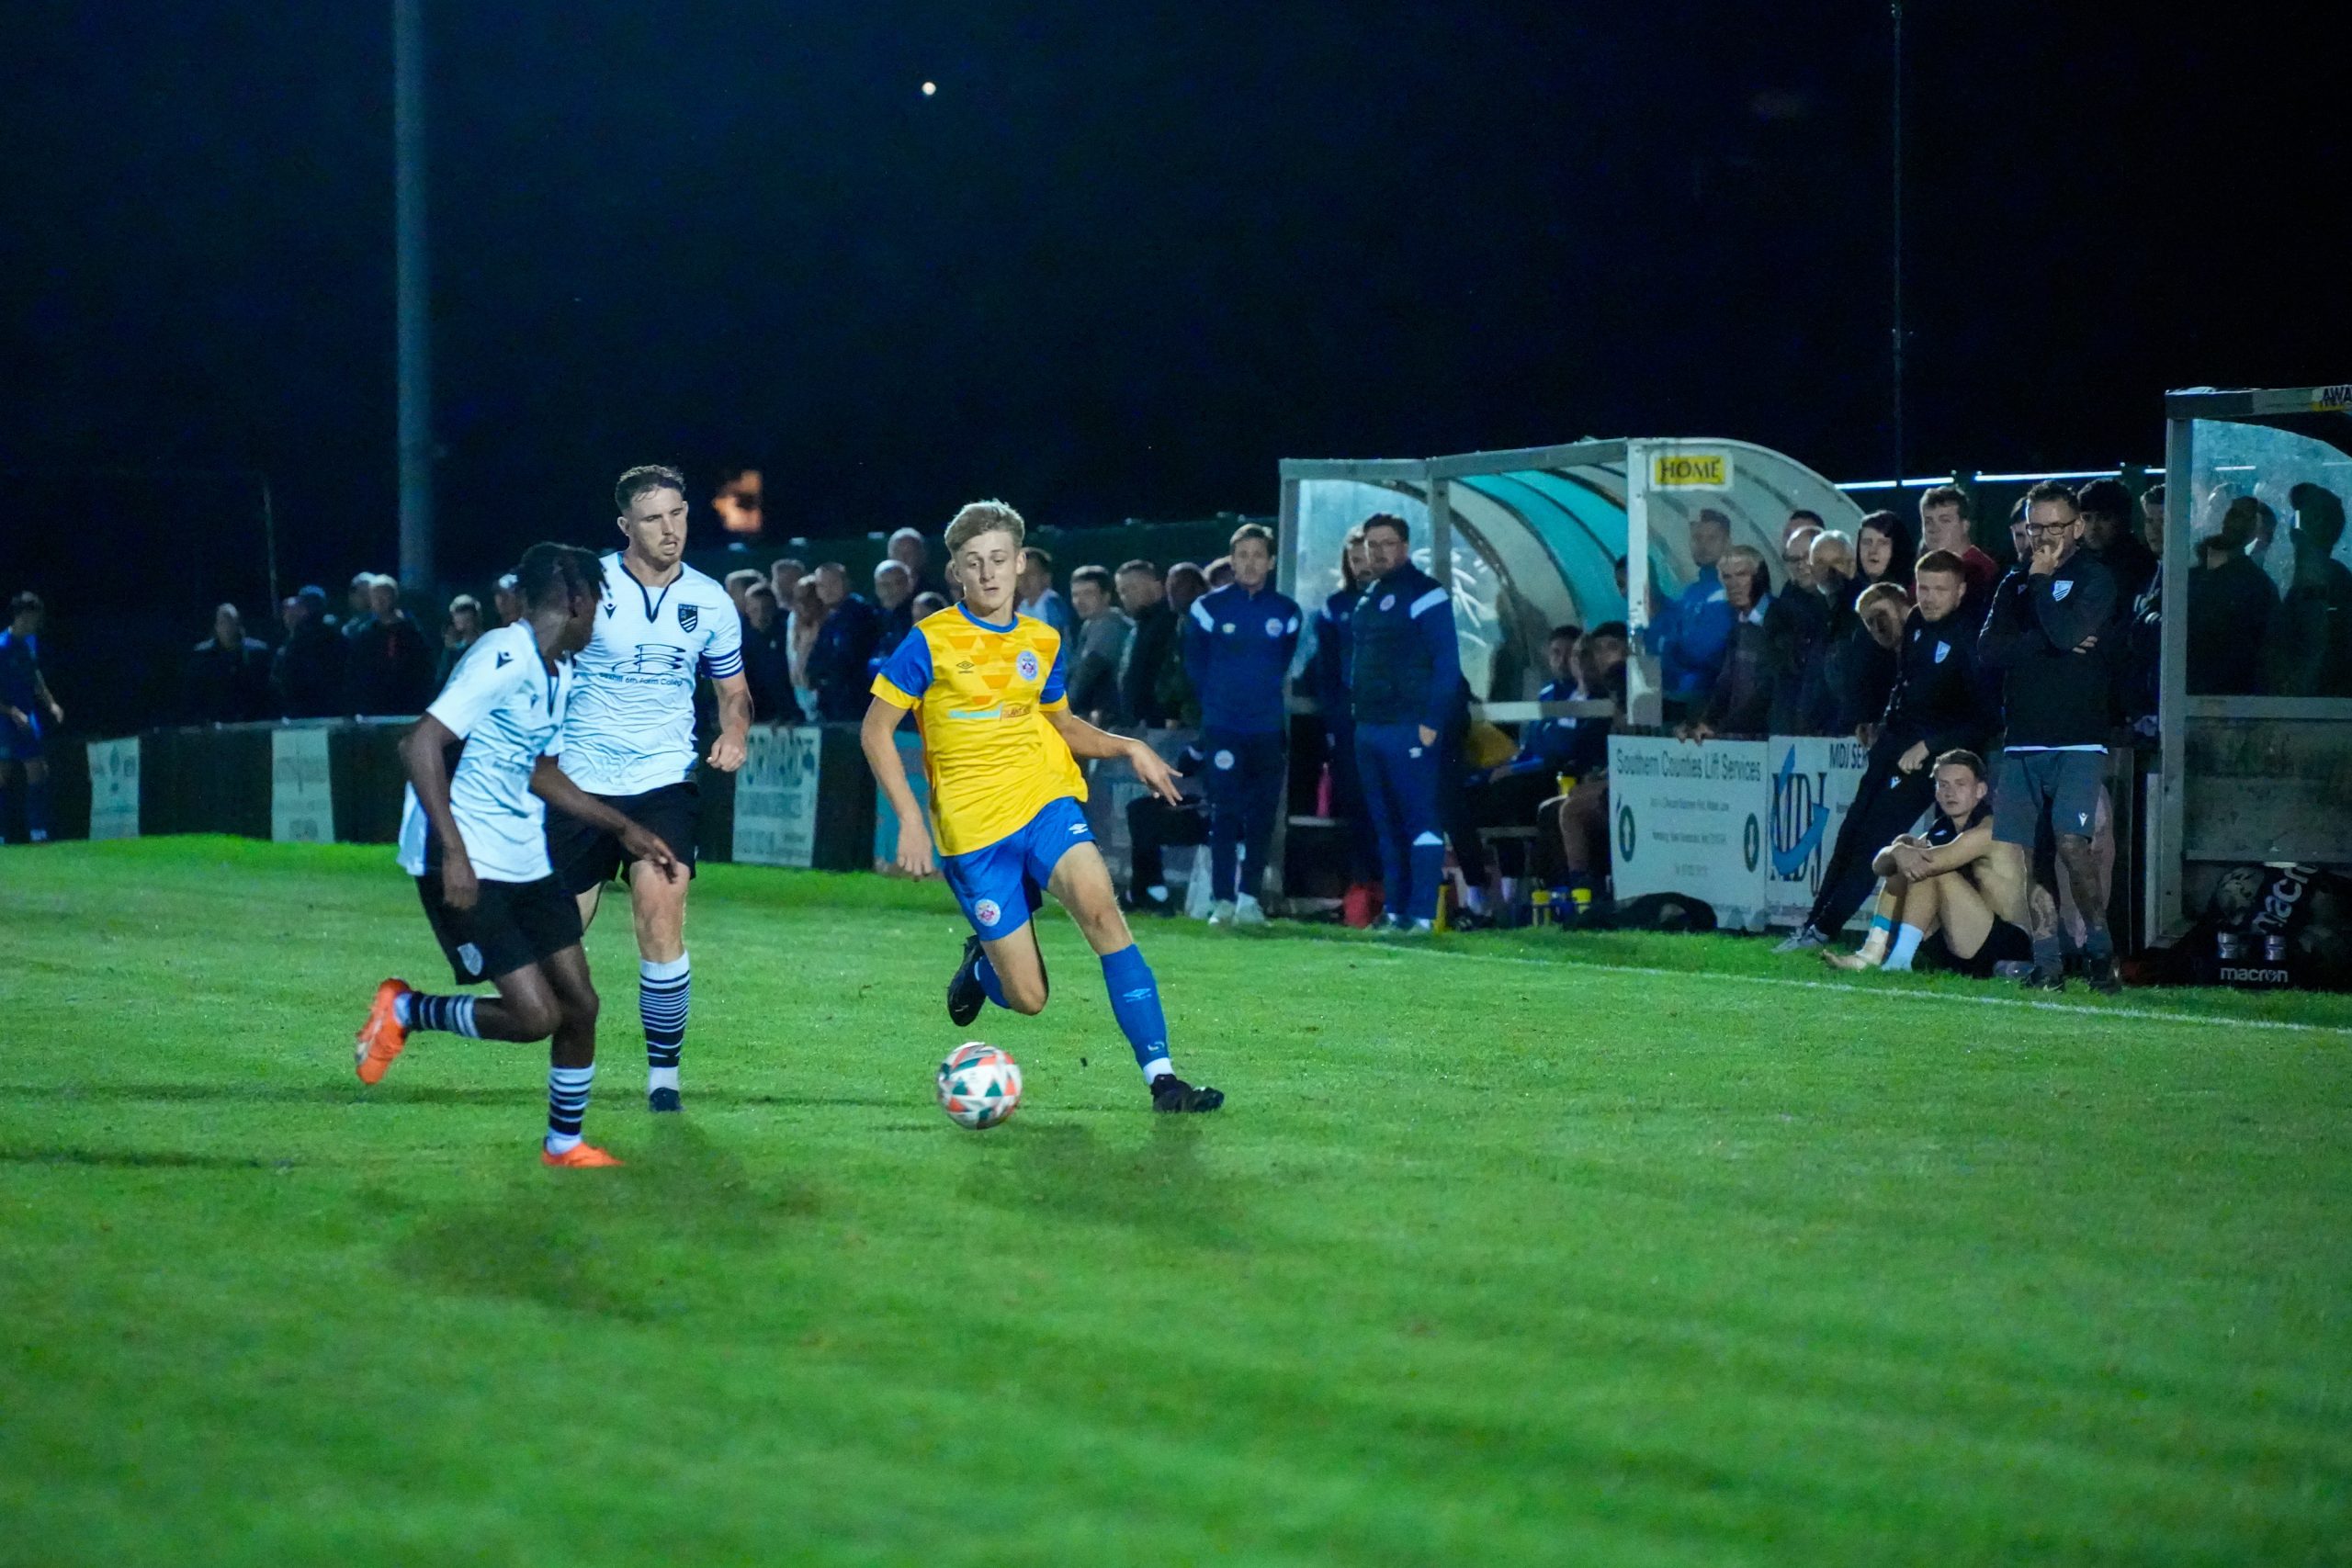 Matthew Myall running down the wing against Bexhill United.